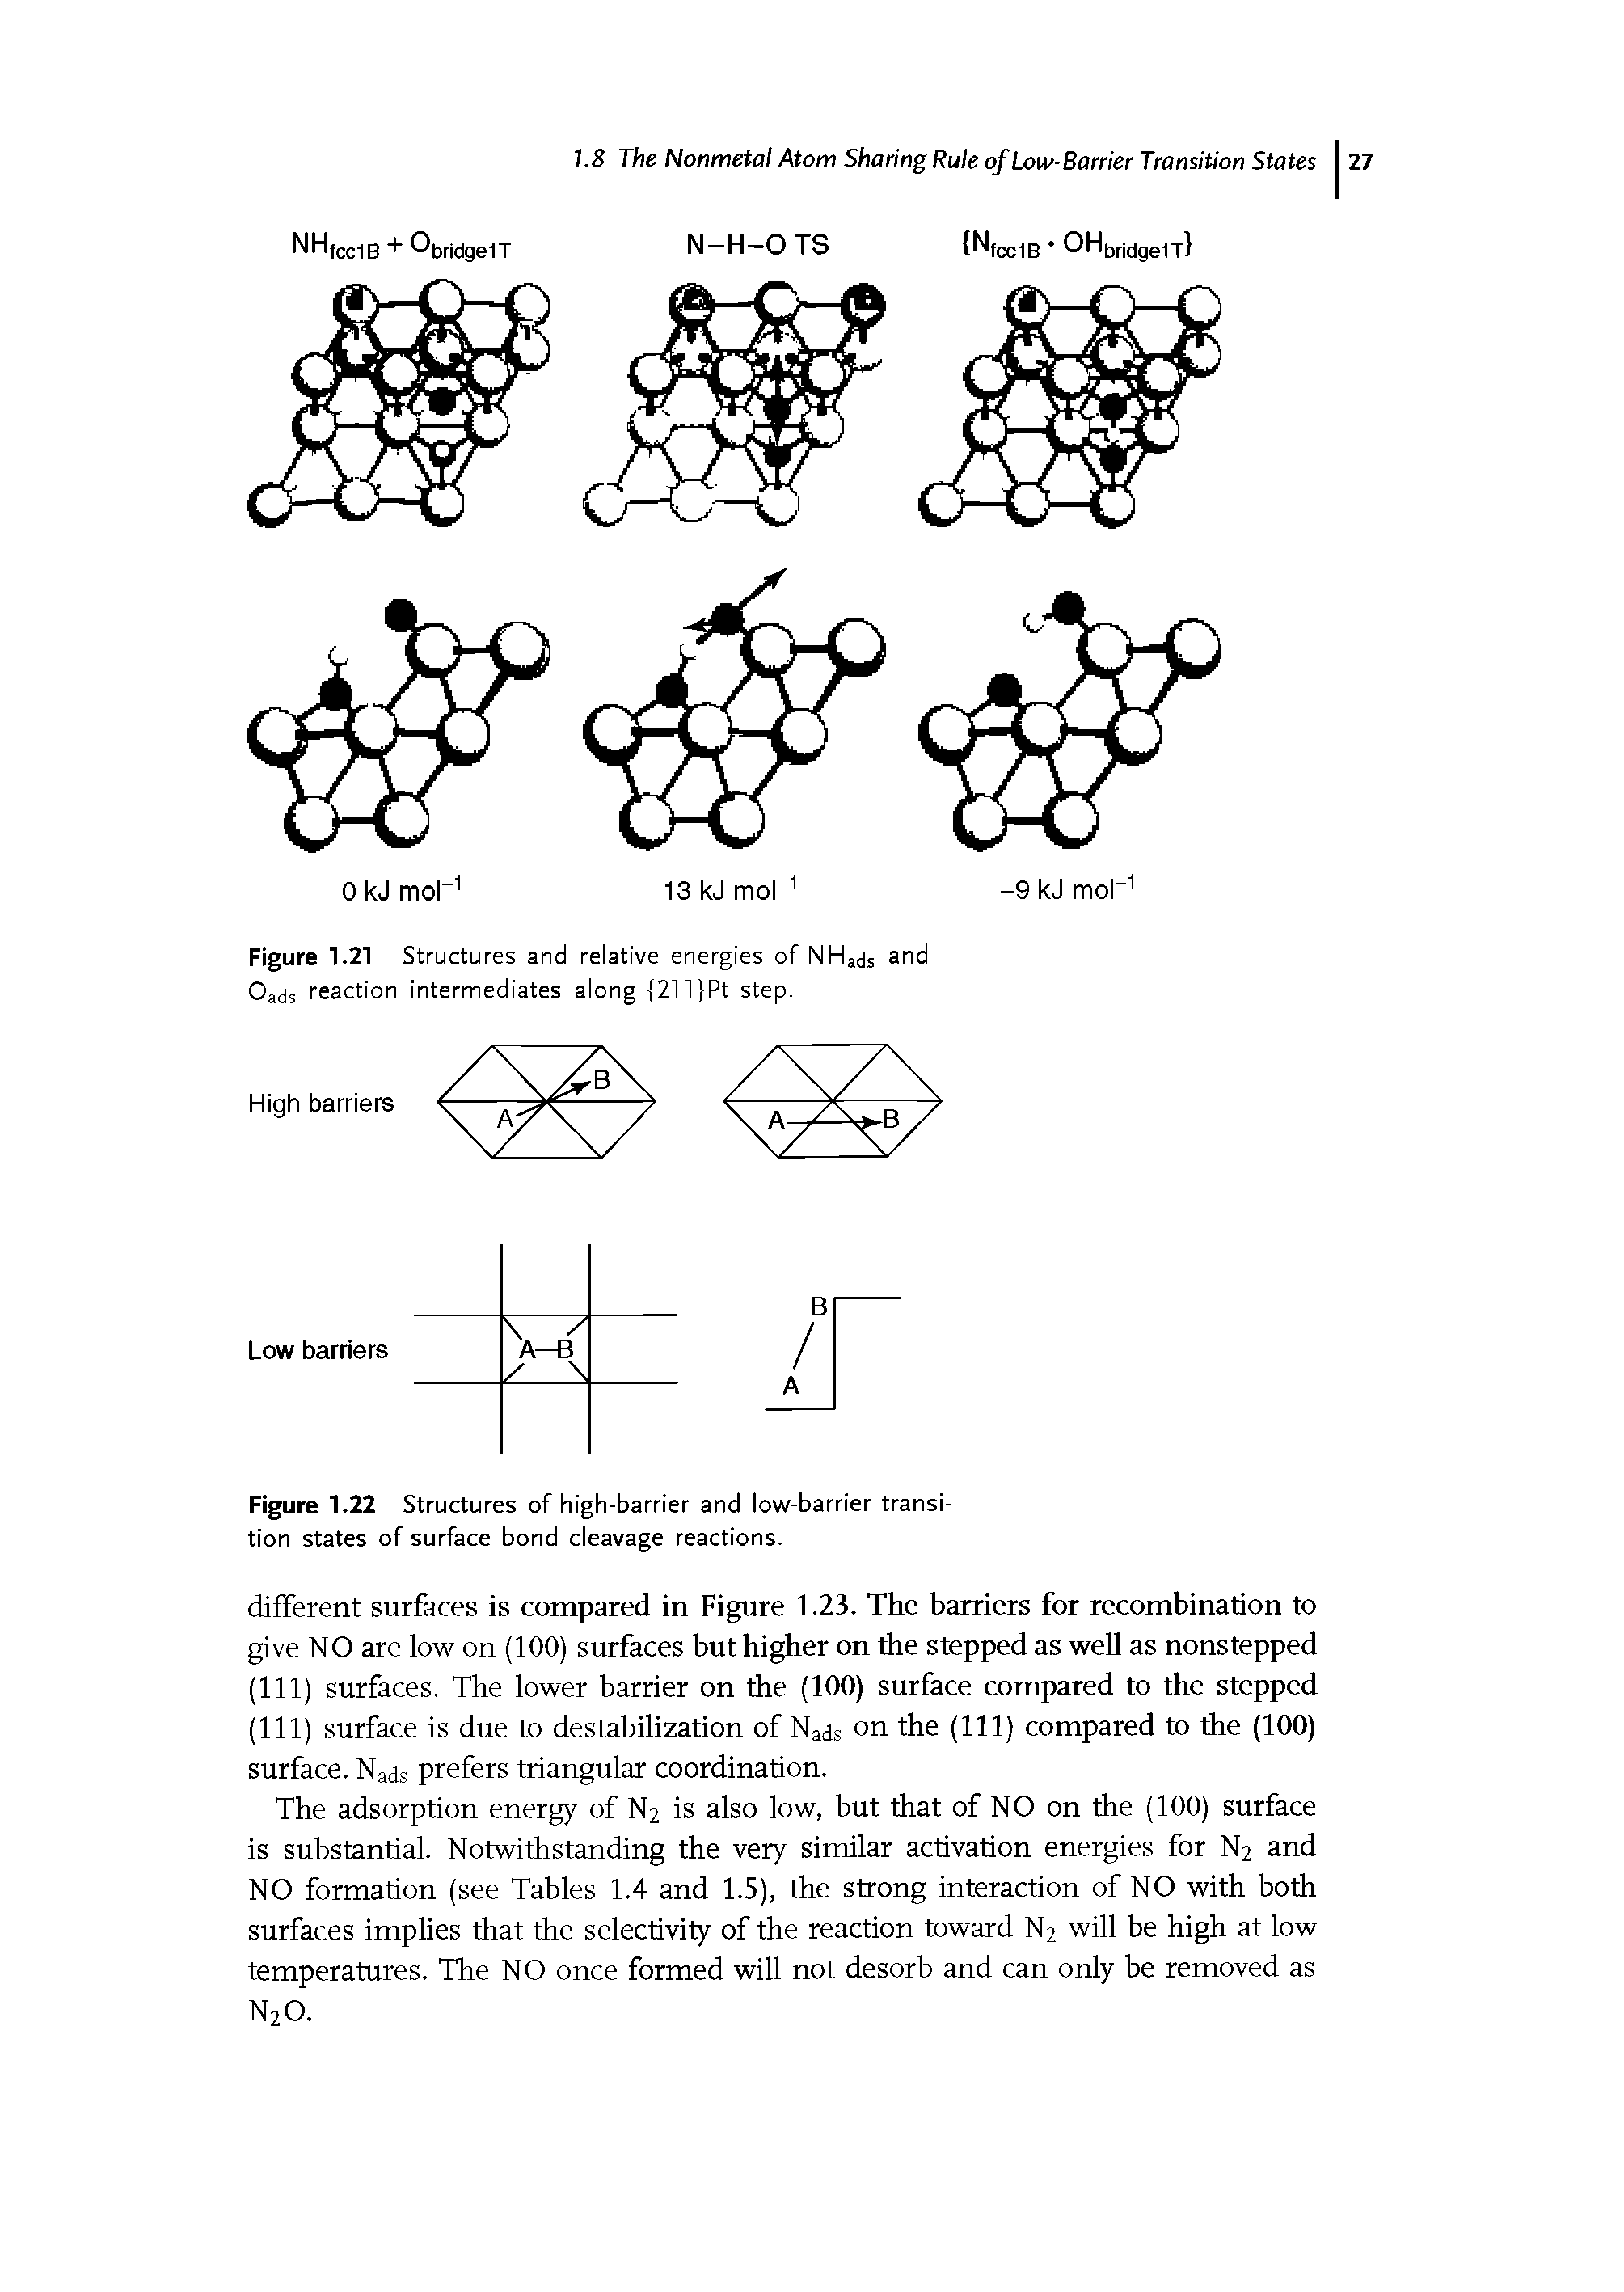 Figure 1.22 Structures of high-barrier and low-barrier transition states of surface bond cleavage reactions.